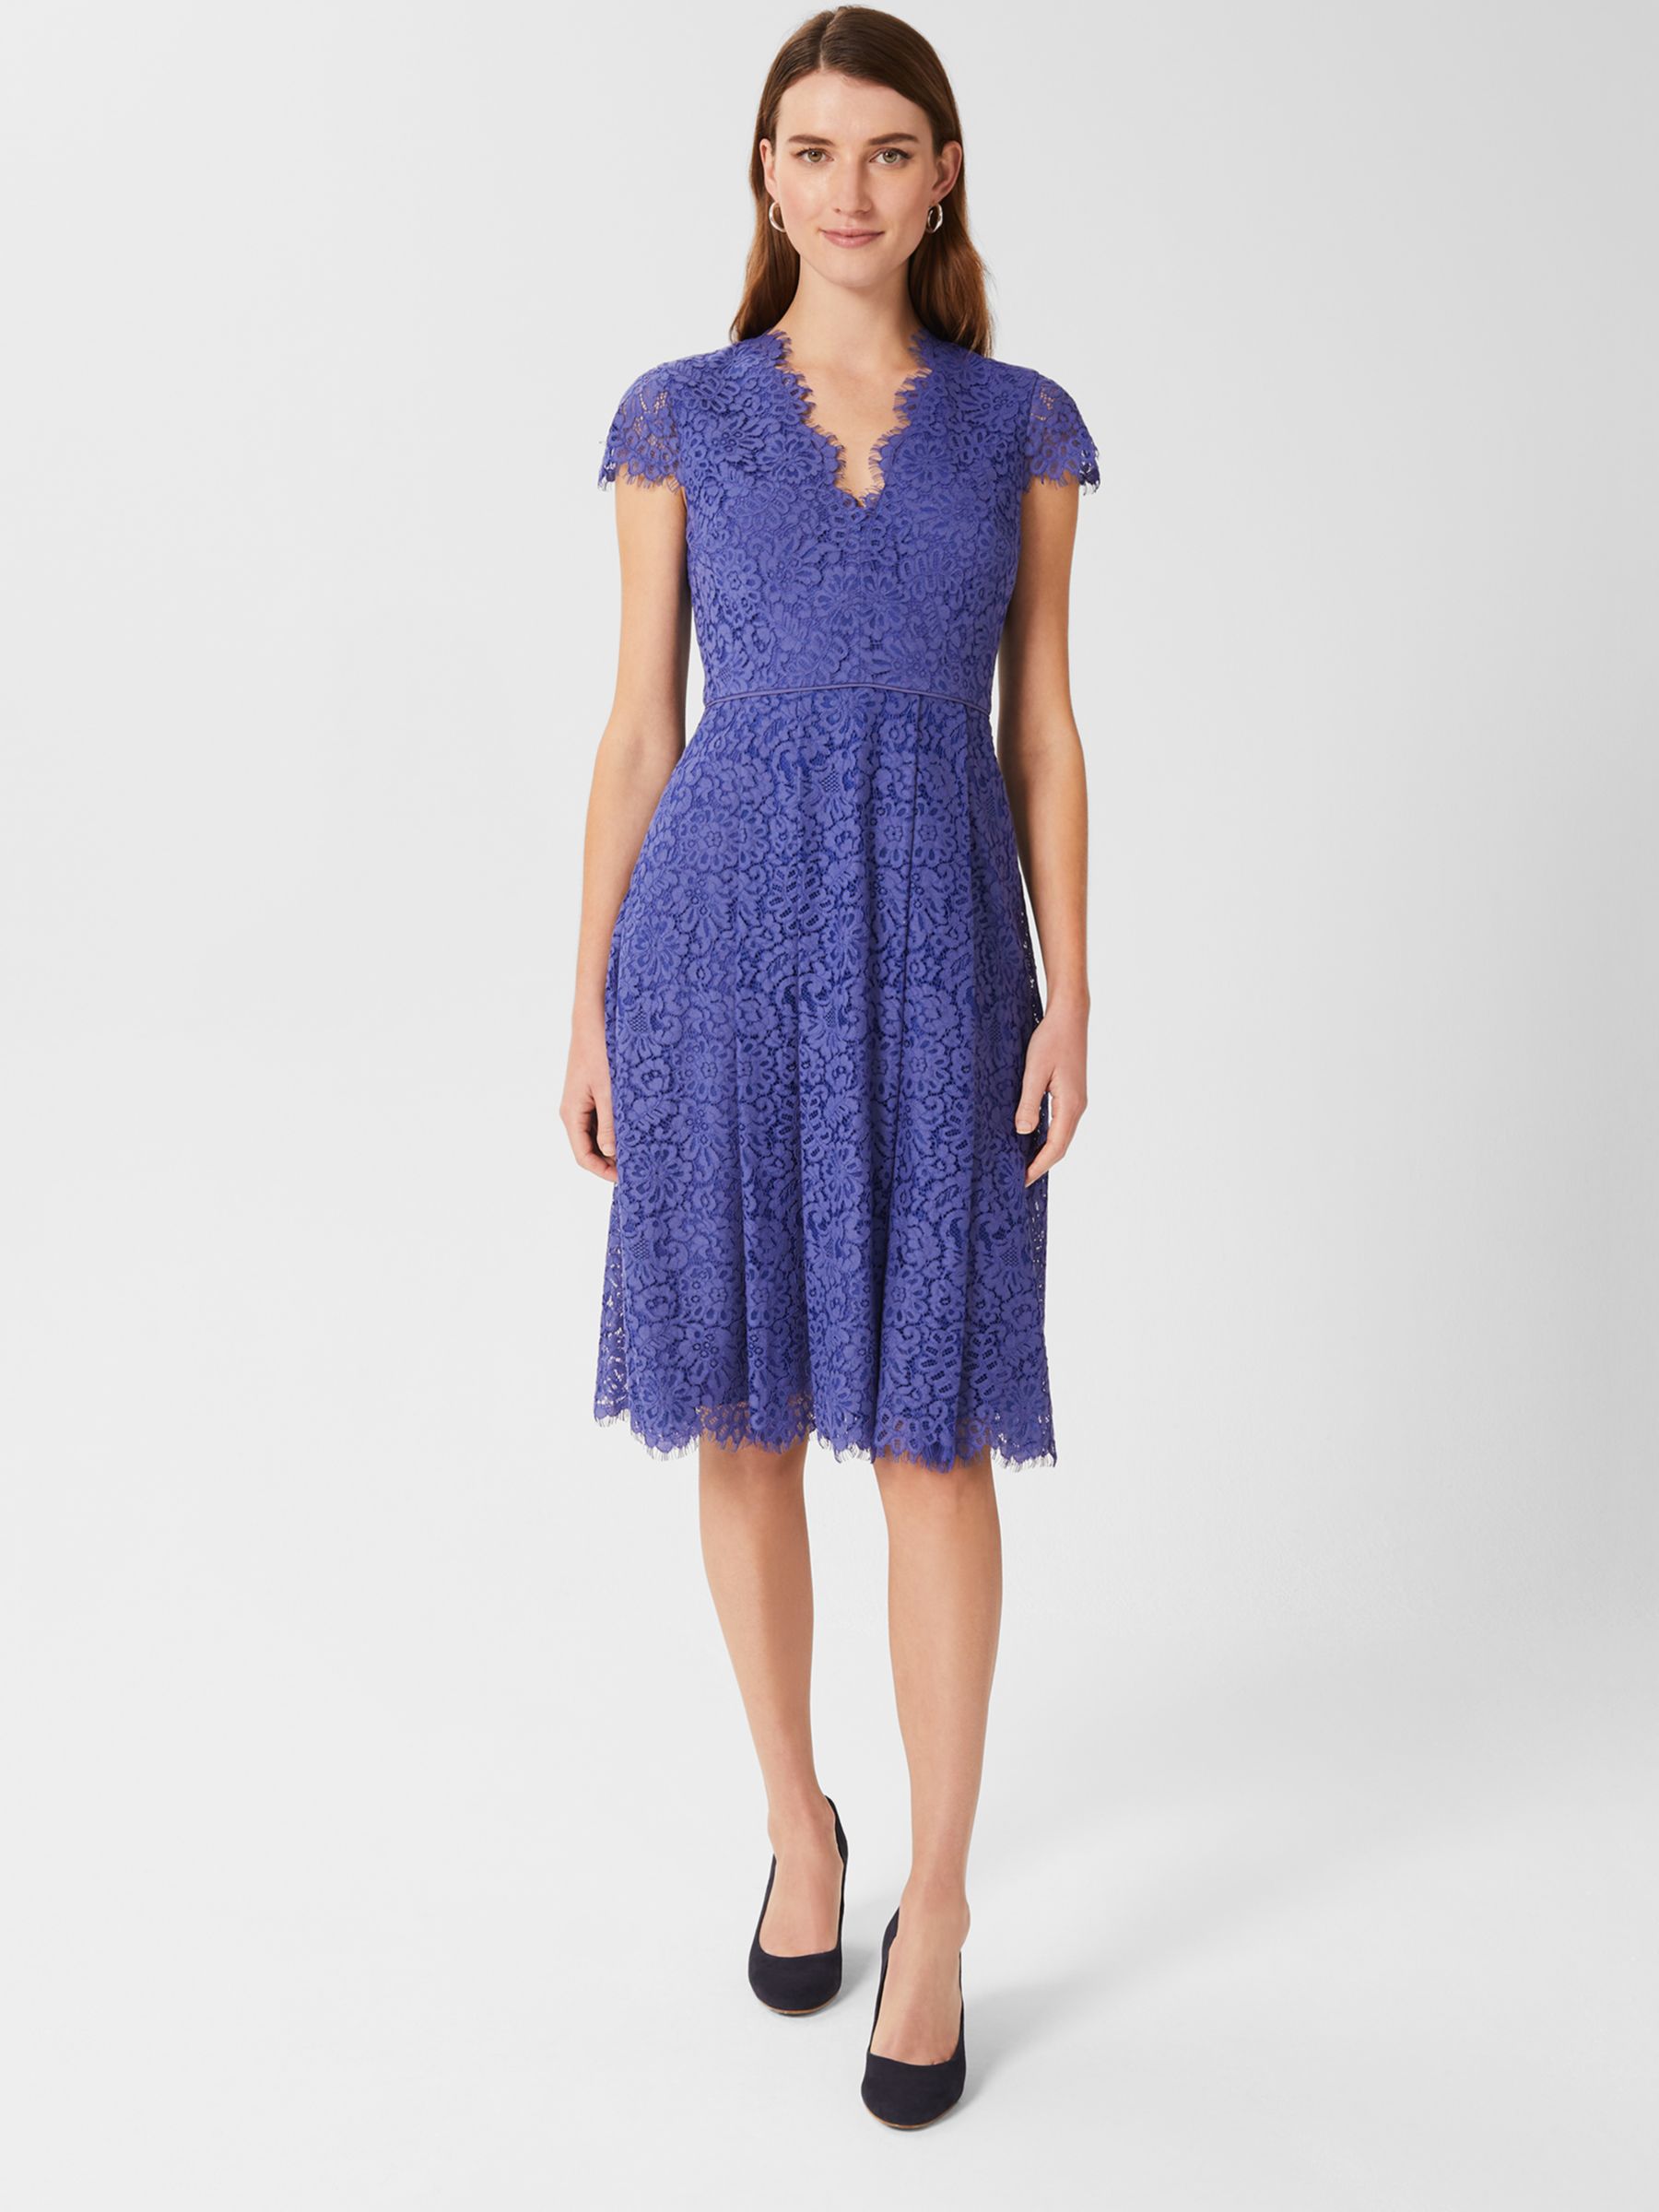 Hobbs Anastasia Fit and Flare Lace Dress, Blue, 12